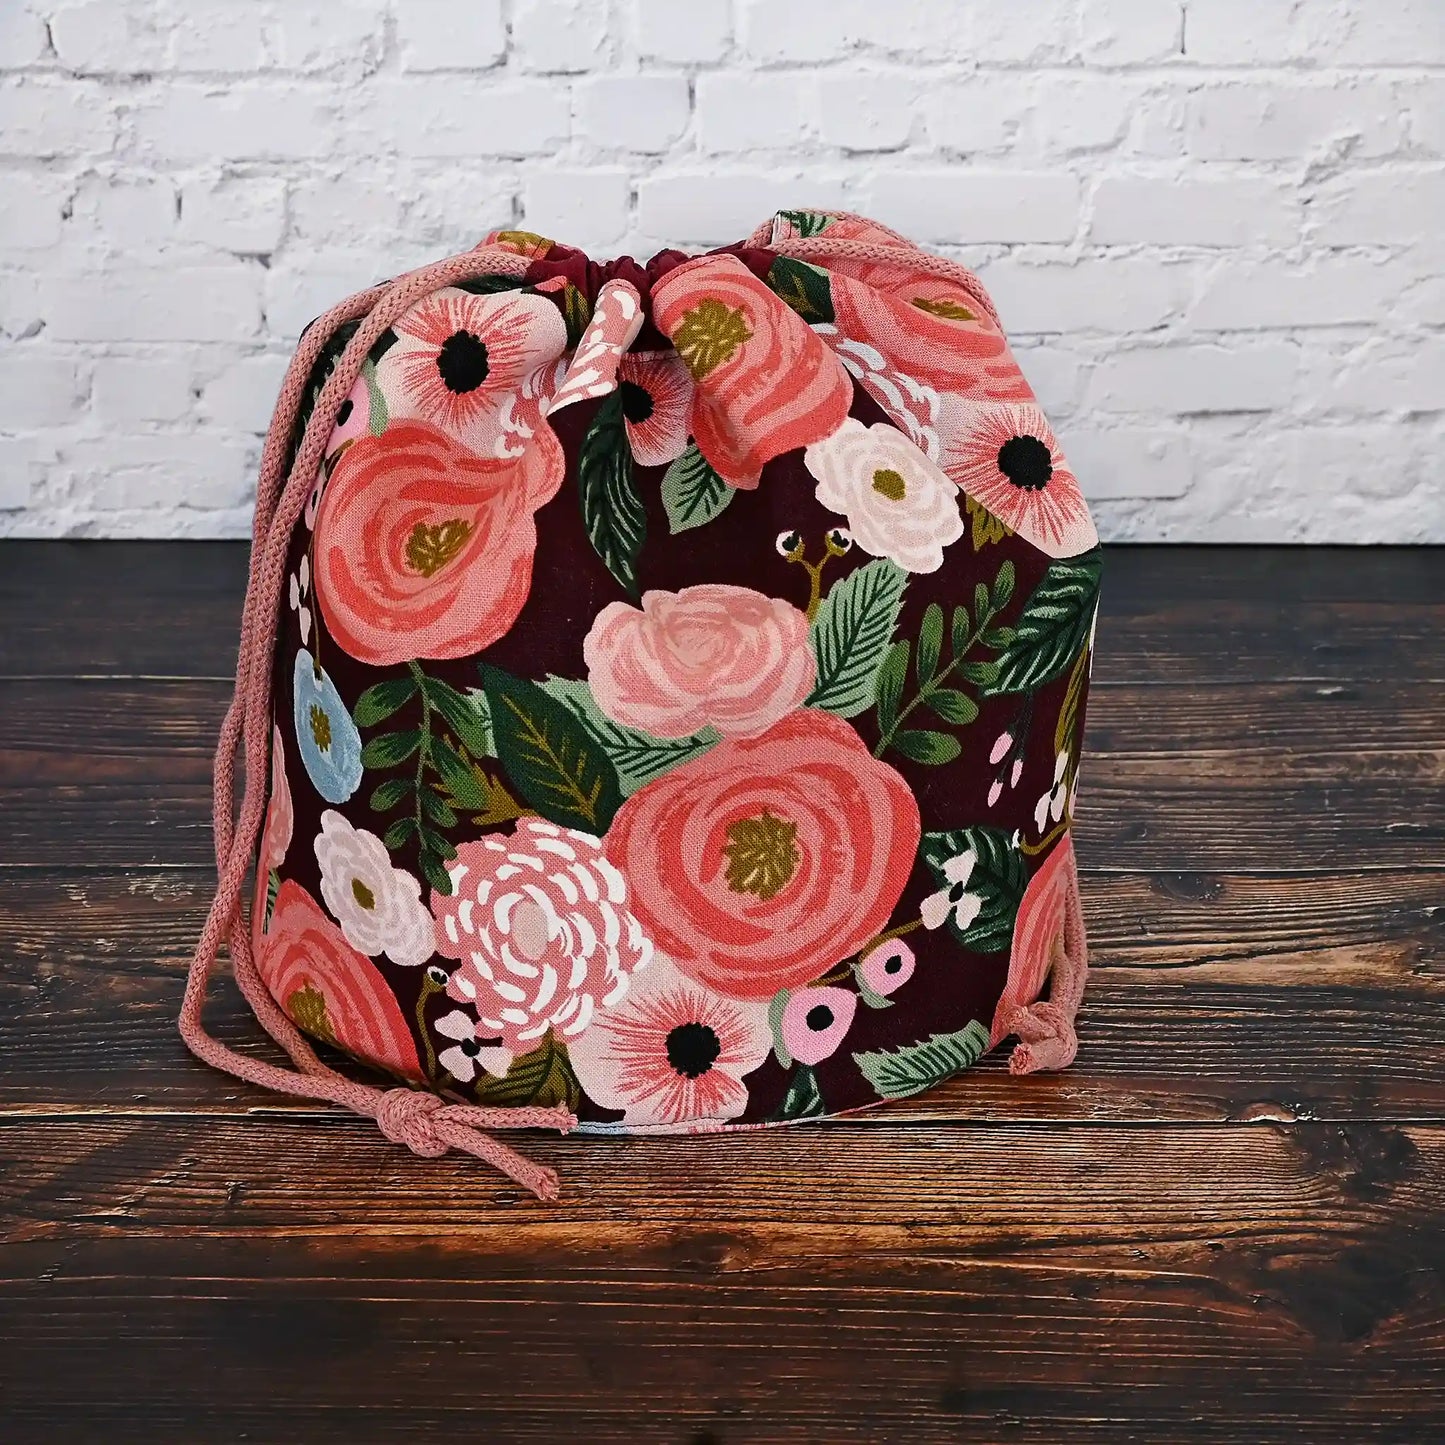 Beautiful burgundy floral bucket bag for knitting or crochet projects.  Made from canvas from the Garden Party collection by Rifle Paper Co and lined in  a pretty blush floral.  This bag has lots of pockets and is quilted on the bottom for stability and design.  Made in Canada by Yellow Petal Handmade.